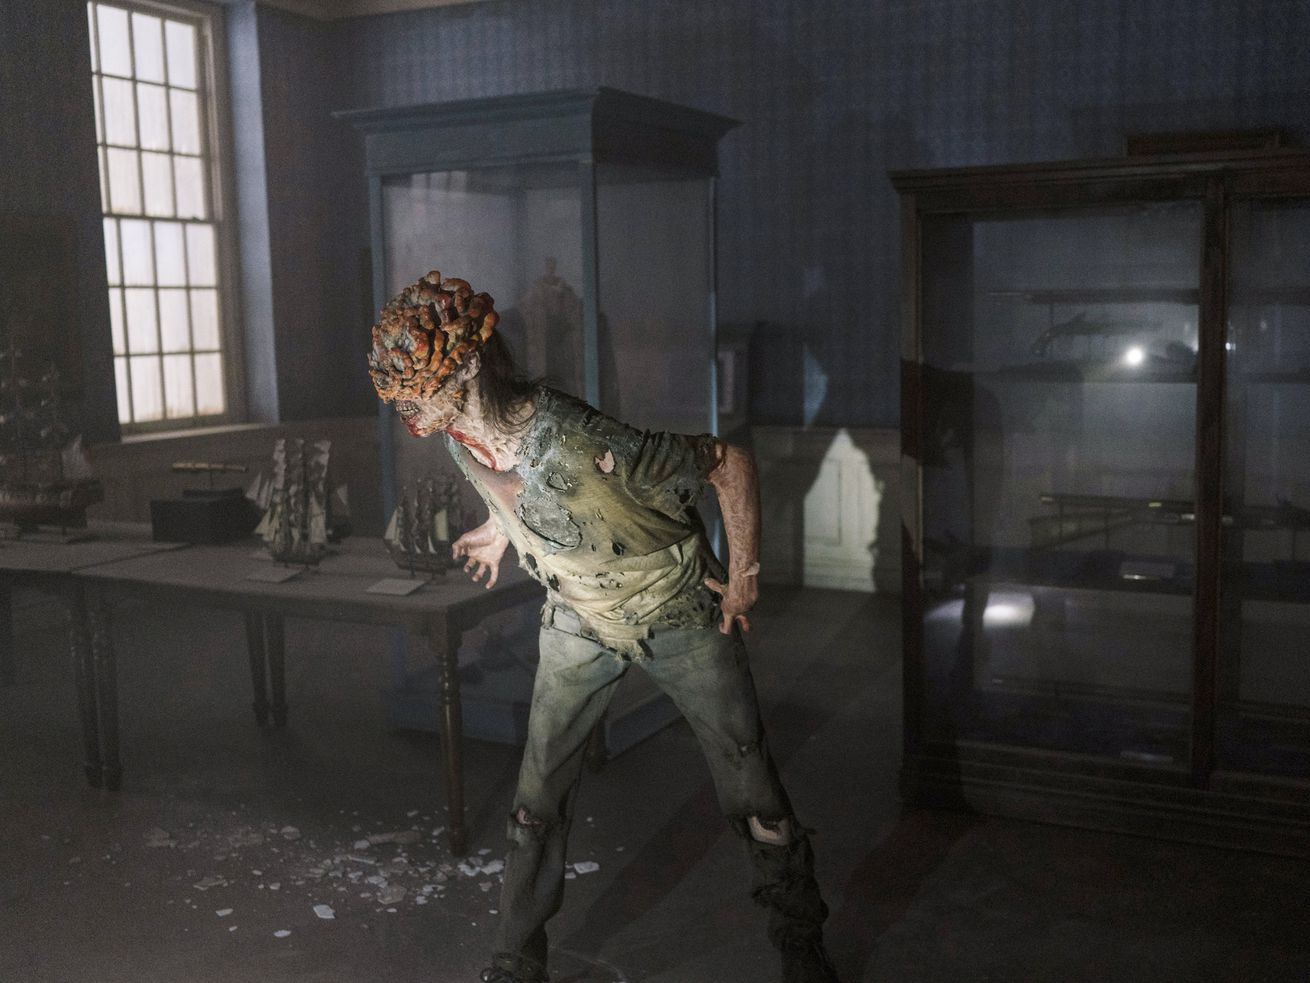 An image from the HBO show, The Last Of Us, showing a person with a fungal rot emerging from their head.